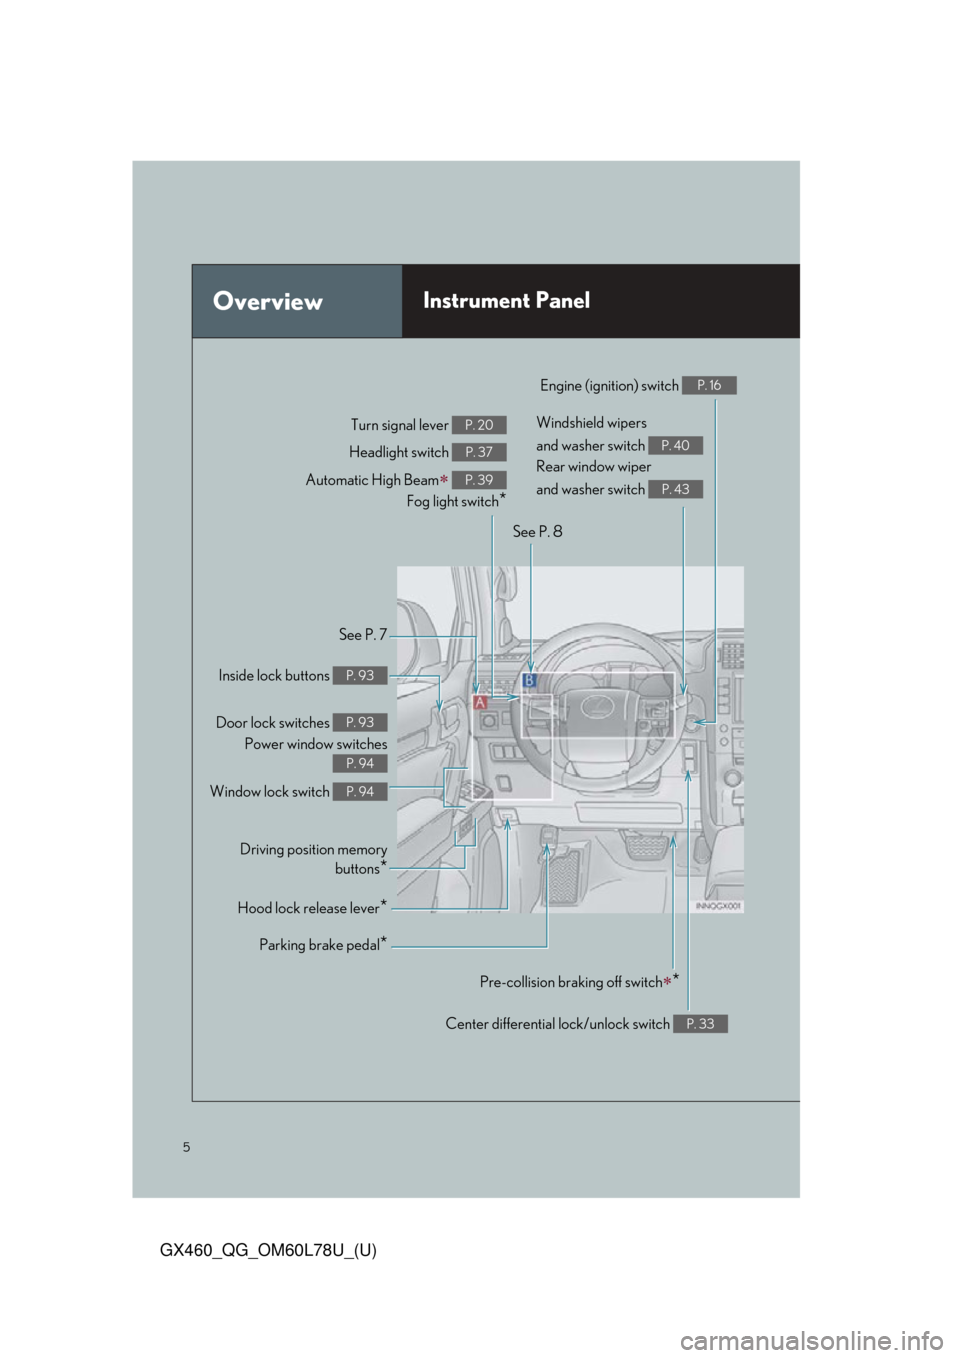 Lexus GX460 2015  Do-it-yourself maintenance / LEXUS 2015 GX460 QUICK GUIDE OWNERS MANUAL (OM60L78U) 5
GX460_QG_OM60L78U_(U)
OverviewInstrument Panel
See P. 7
Inside lock buttons 
P. 93
Door lock switches P. 93
Power window switches
P. 94
Window lock switch P. 94
Driving position memory buttons
*
Hoo